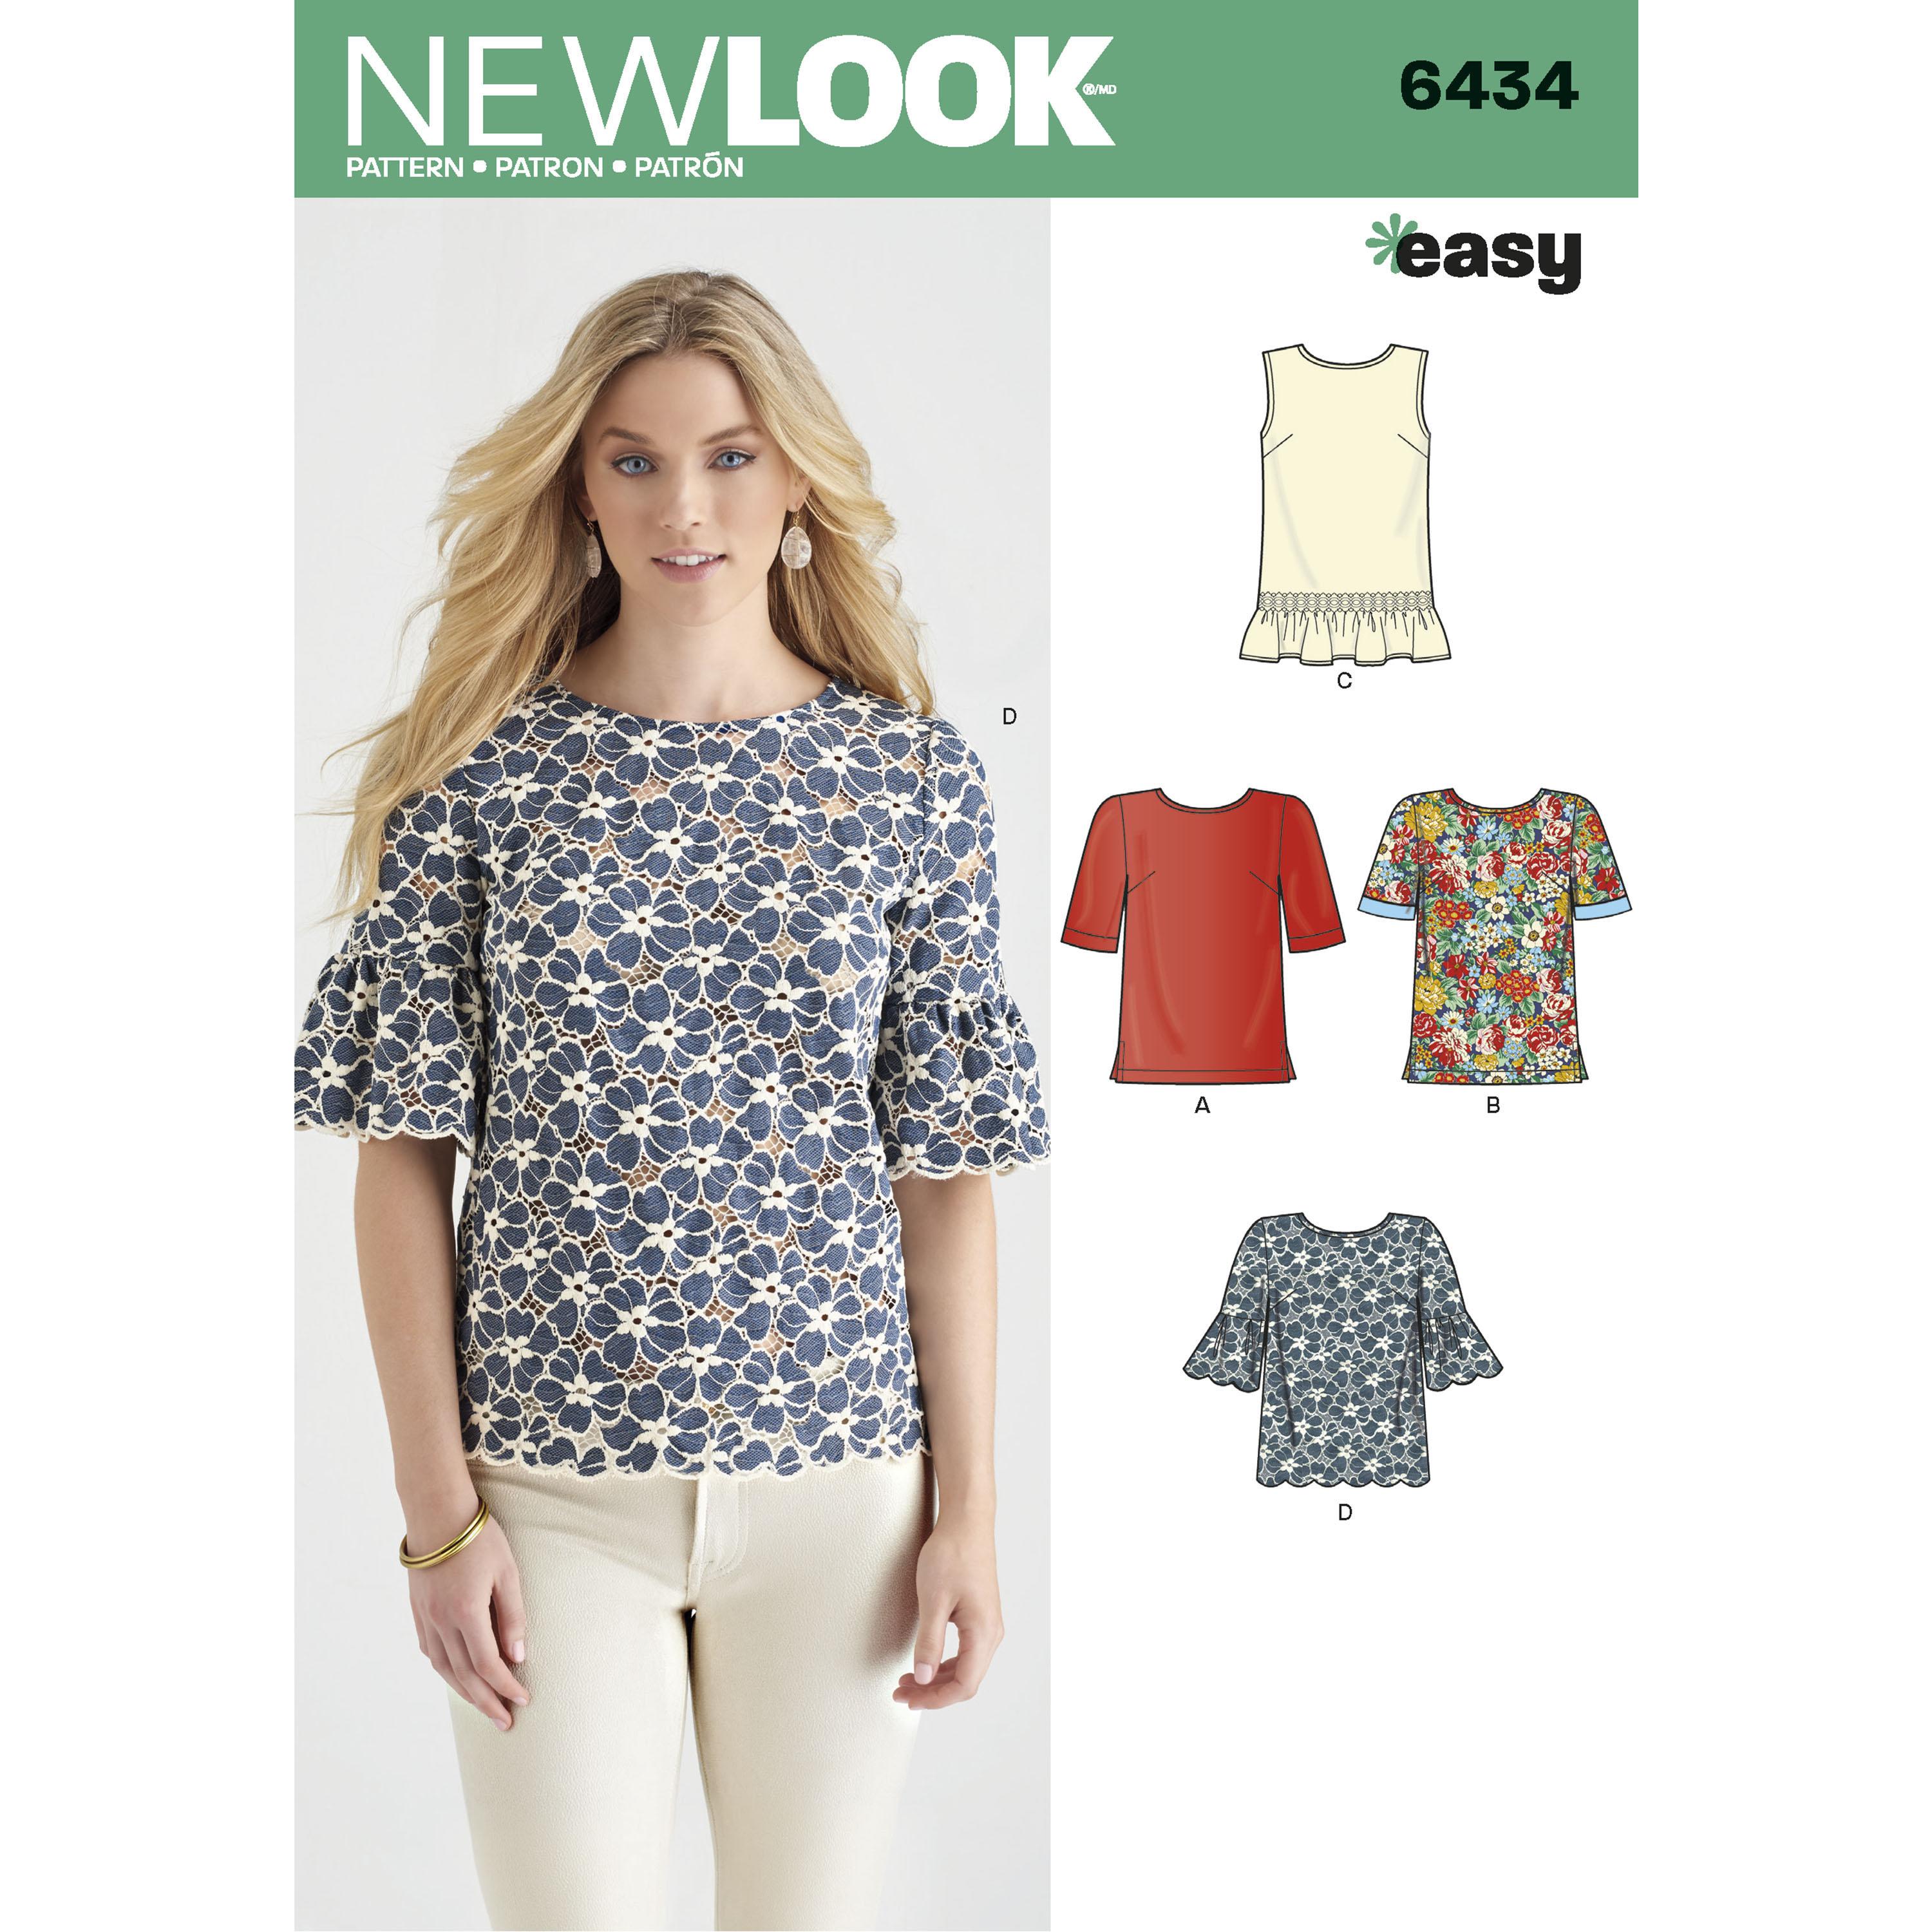 NewLook N6434 Misses' Tops with Fabric Variations